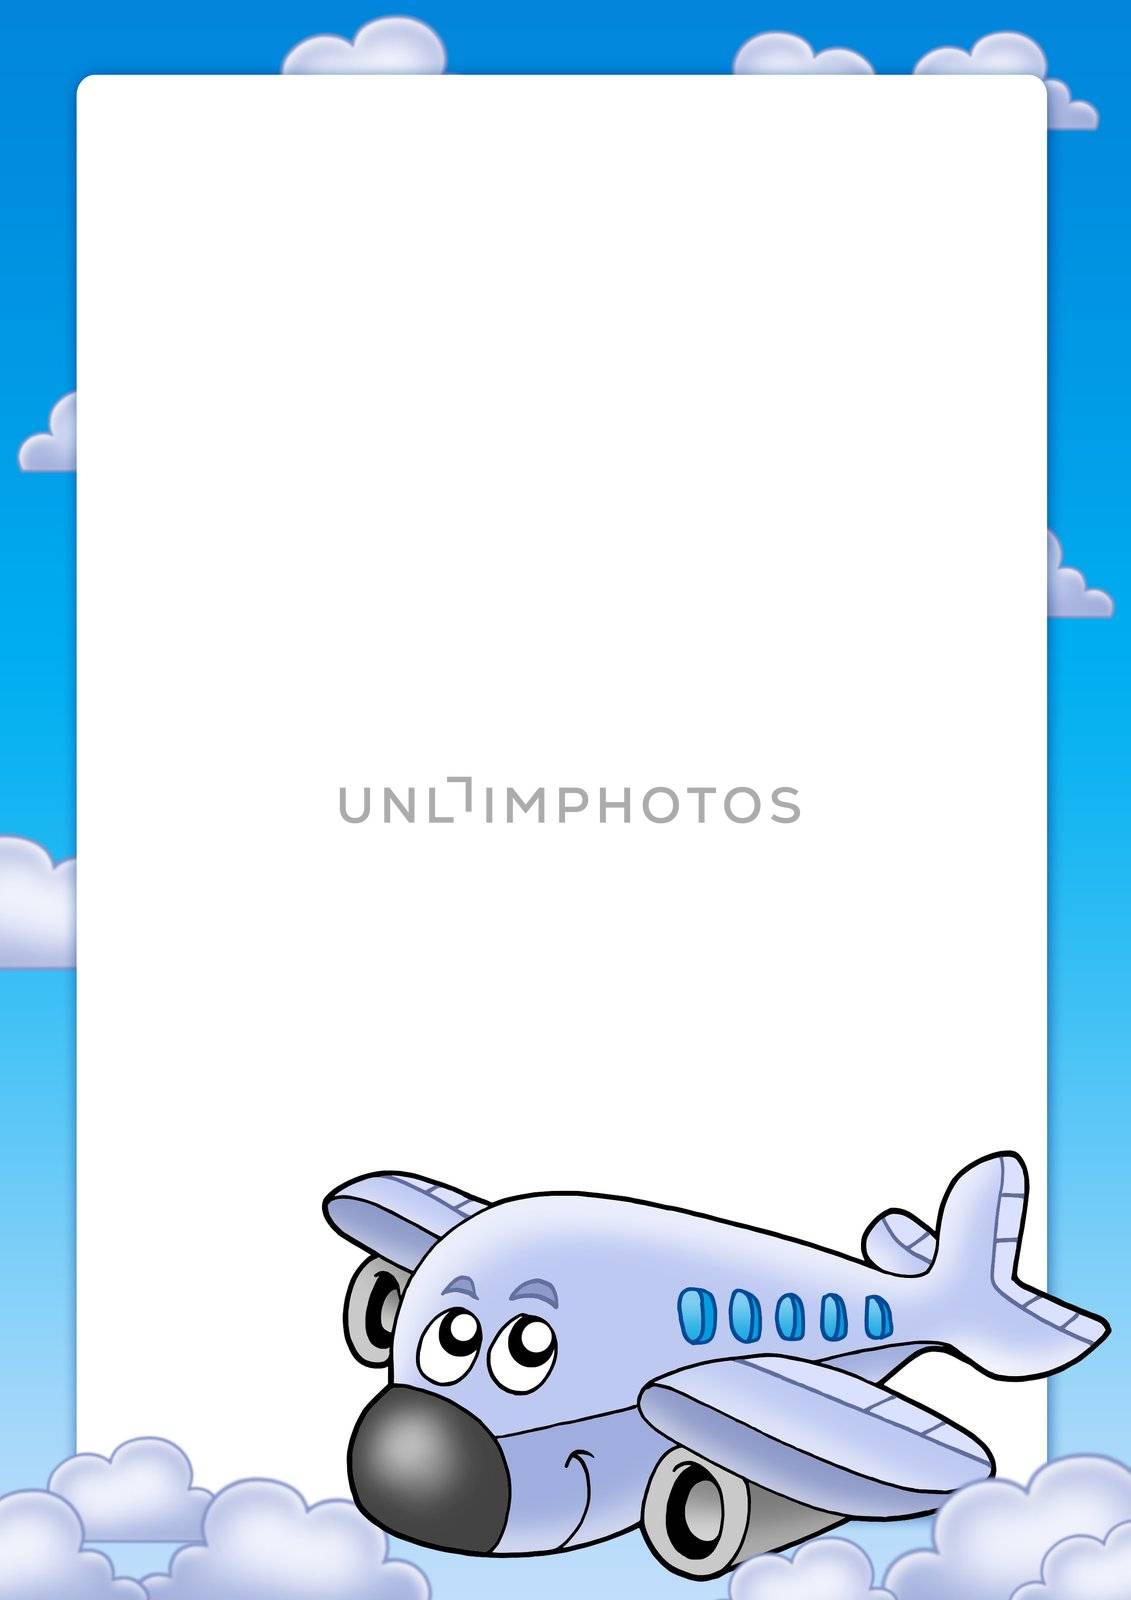 Frame with cute airplane and clouds - color illustration.